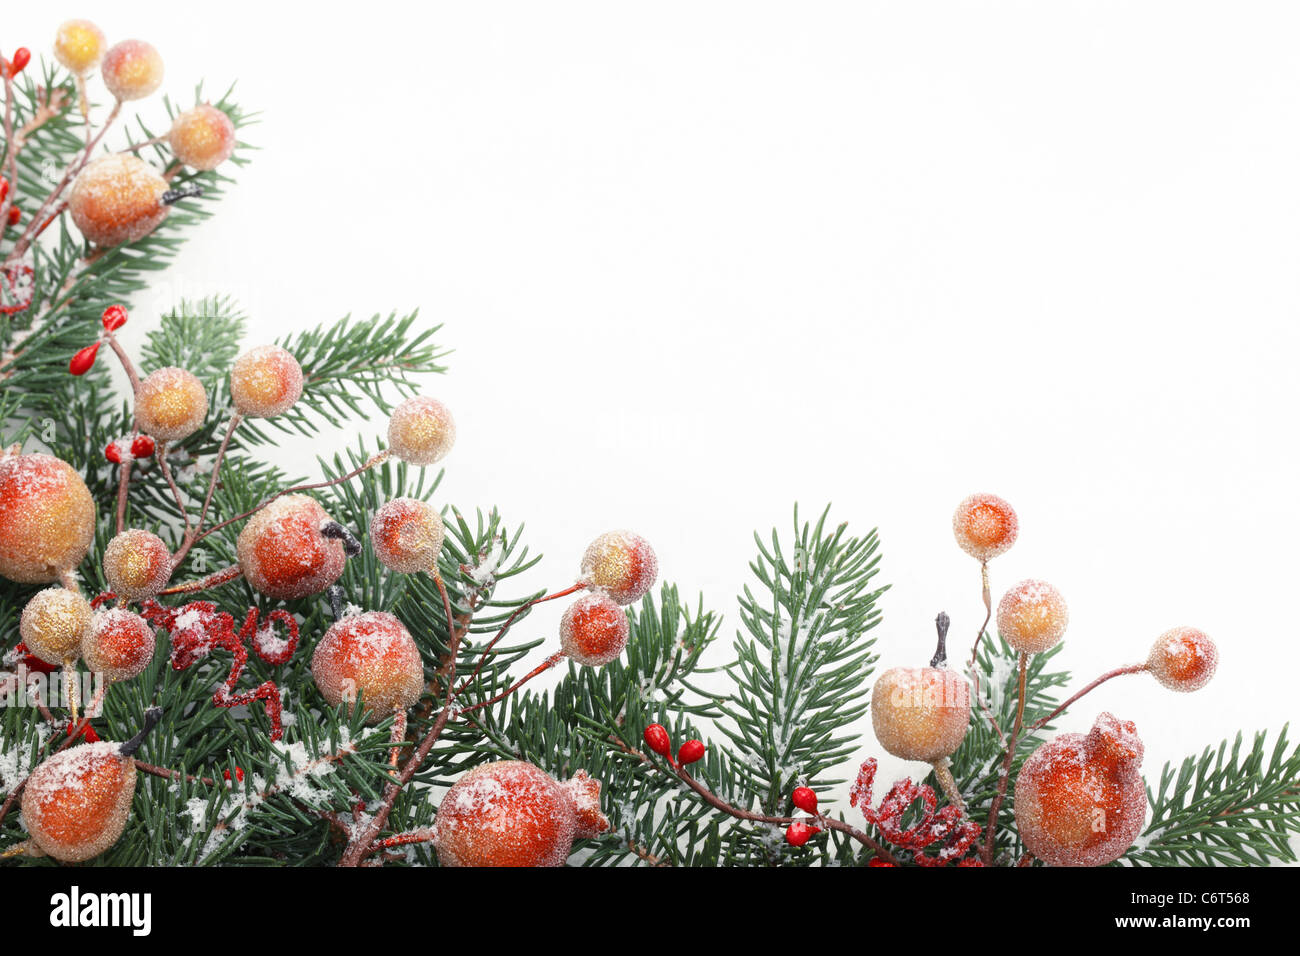 Pine branches and berries with snow. Stock Photo